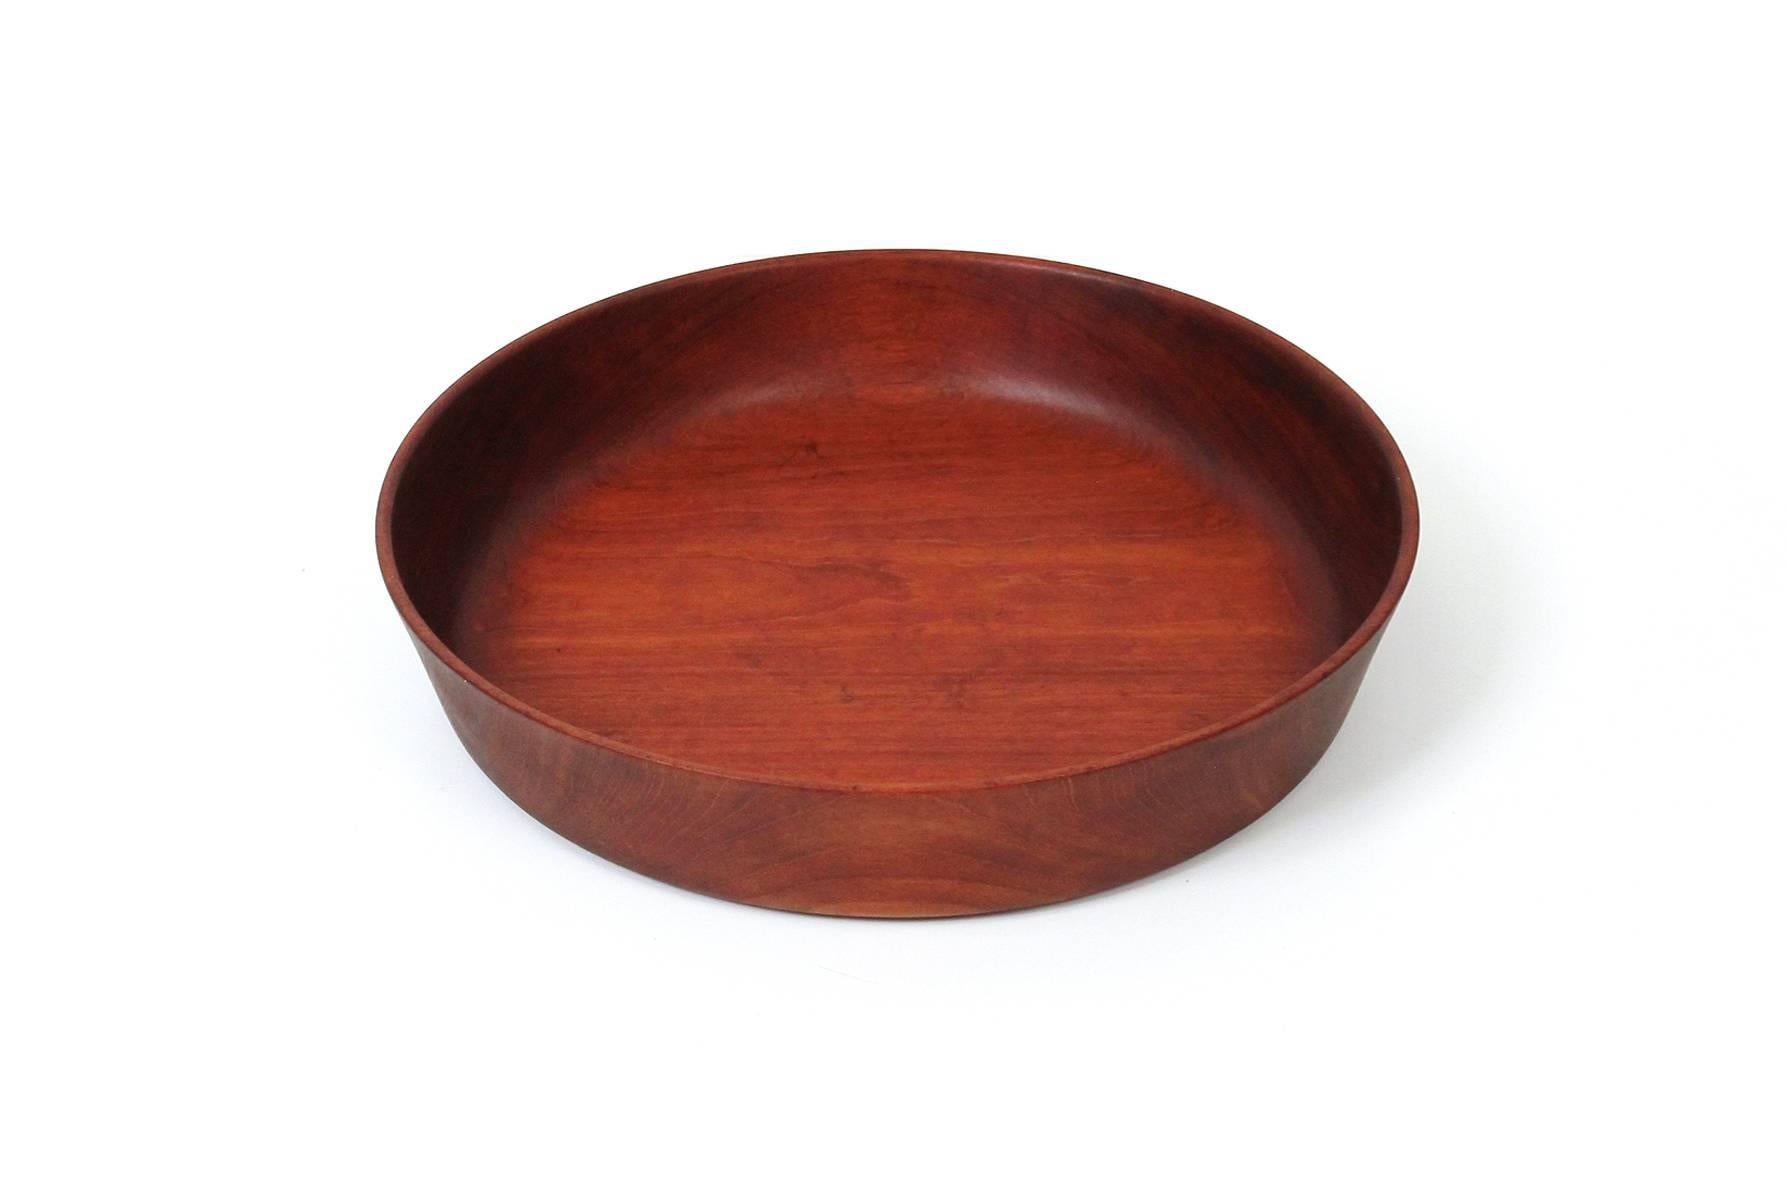 Large-scale turned wood bowl by exhibited New England wood turner William Frost. This example was hand turned from a single piece of wood. Beautifully grained and delicate design. Signed with the WFrost mark to the underside.
  